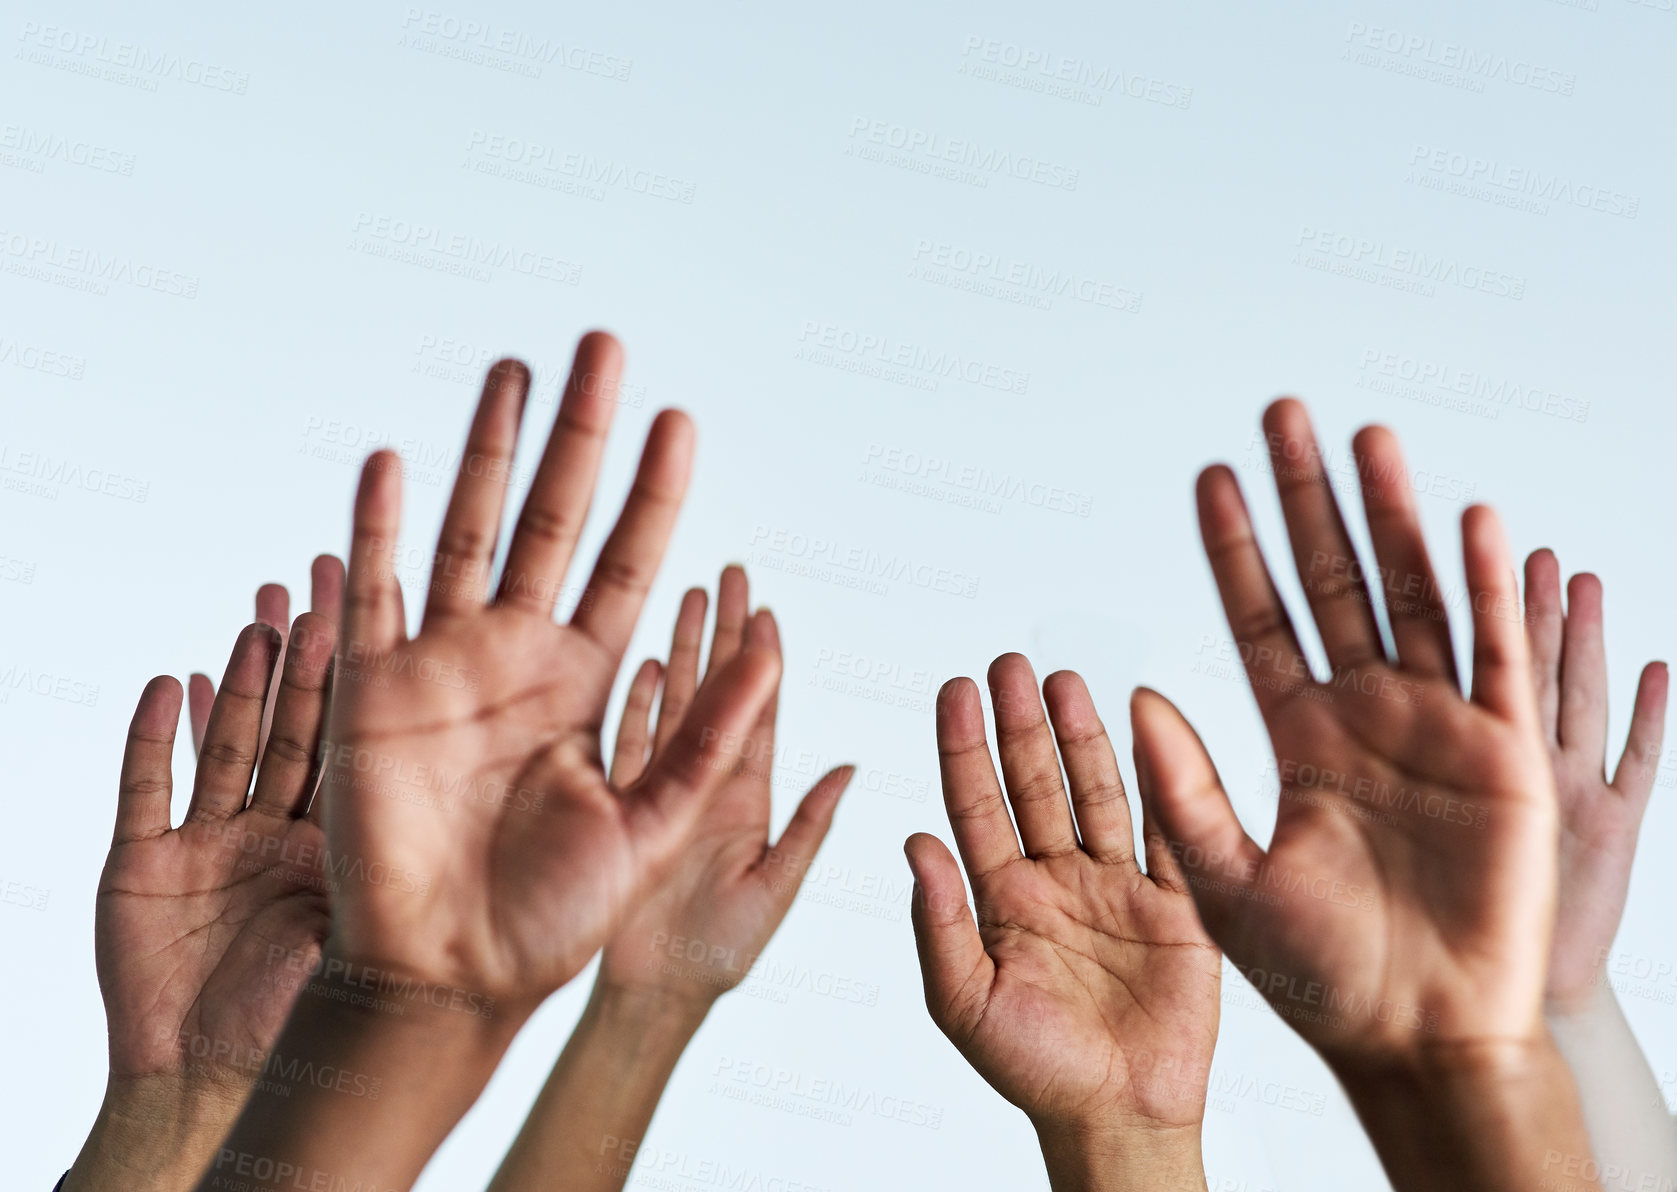 Buy stock photo Shot of a group of hands reaching up against a white background